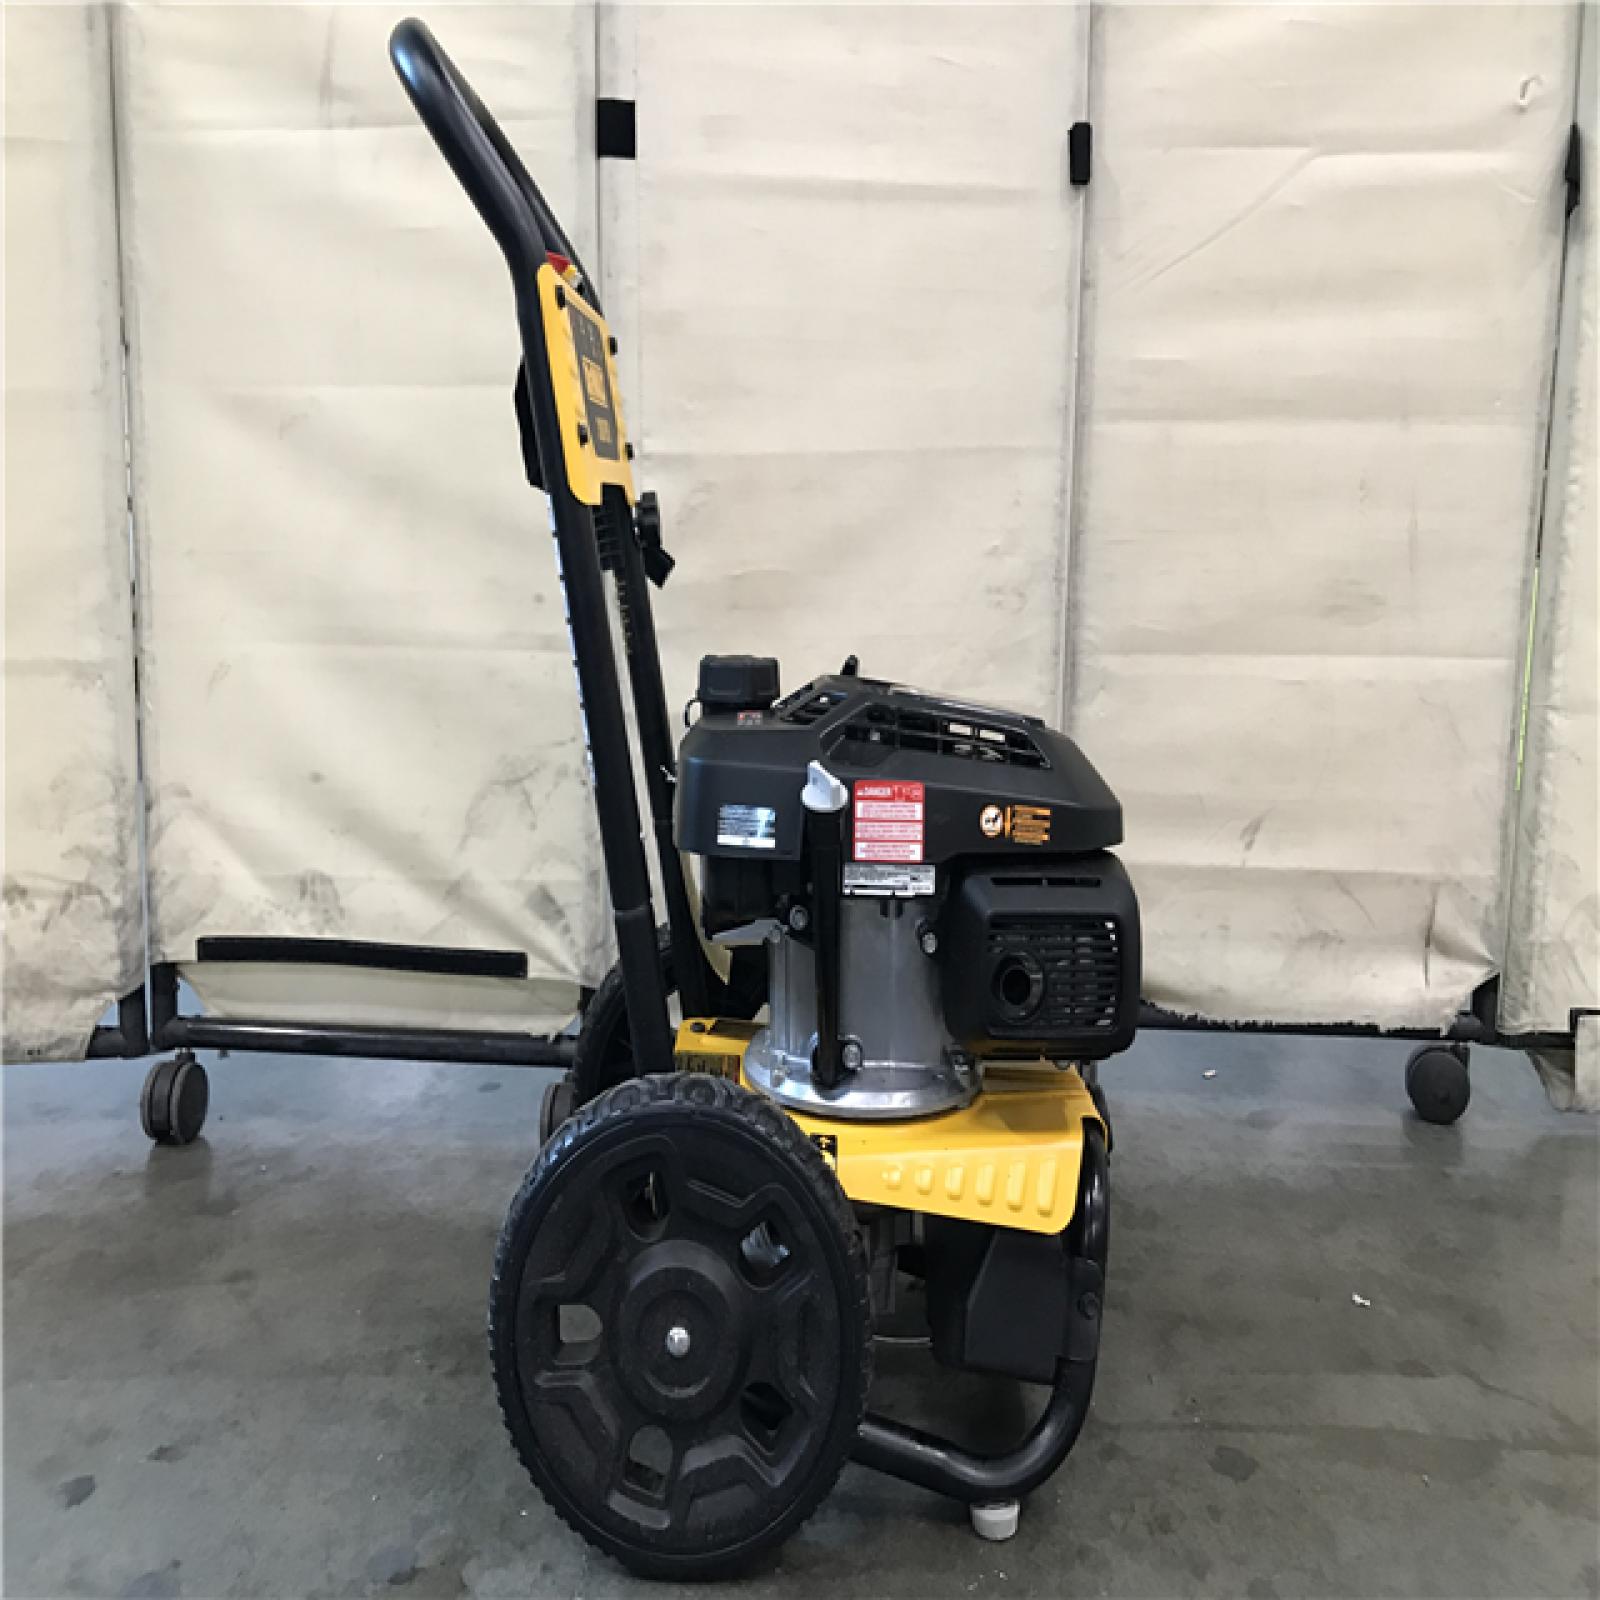 California AS-IS DEWALT 3100 PSI at 2.3 GPM Honda Cold Water Professional Gas Pressure Washer-Appears LIKE-NEW Condition